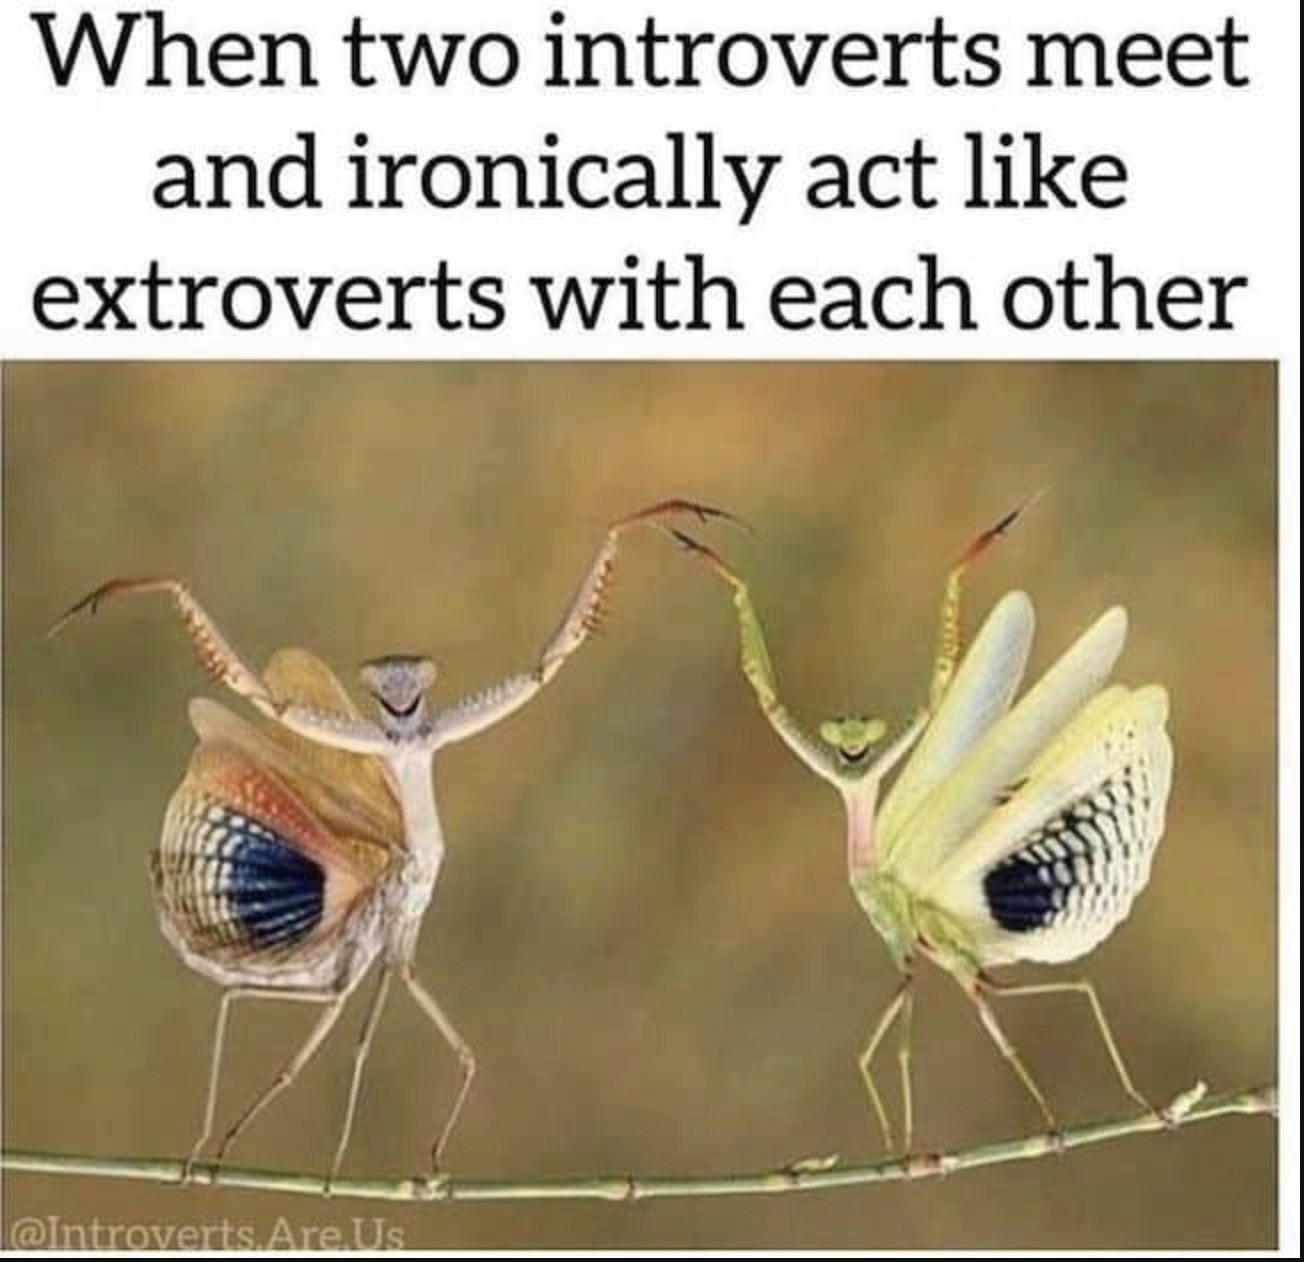 Two bugs dancing on a stick underneath the words &quot;When two introverts meet and ironically act like extroverts with each other.&quot;